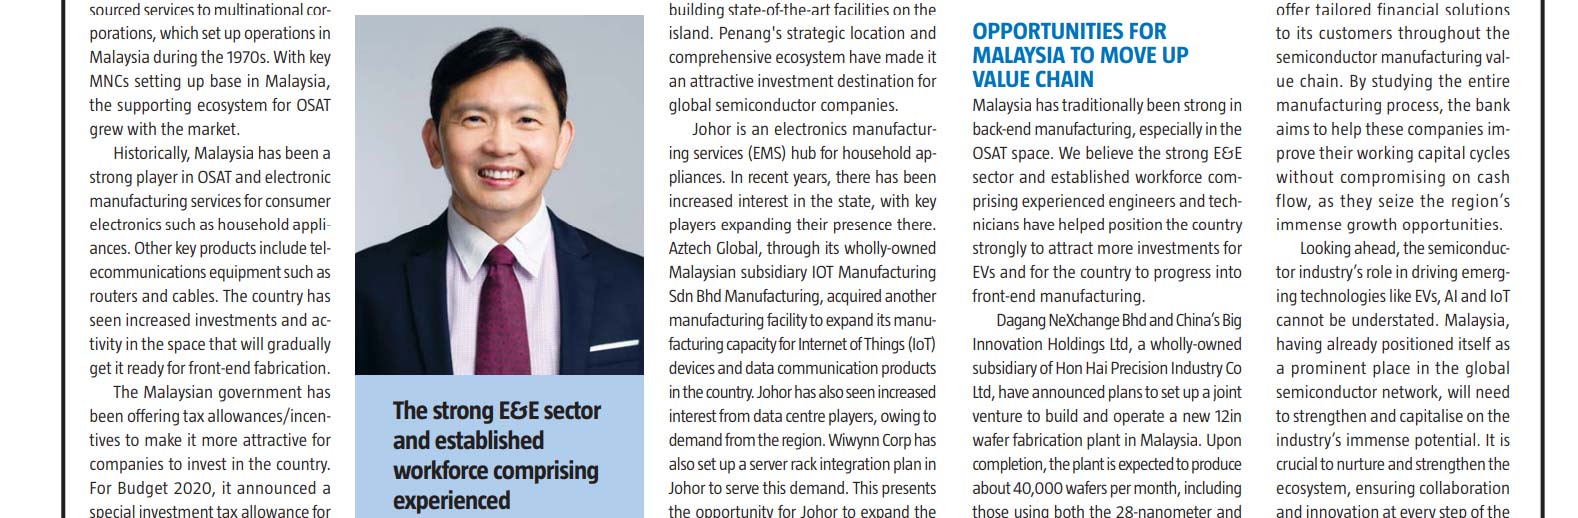 Malaysia is well positioned to support growth in the semiconductor space